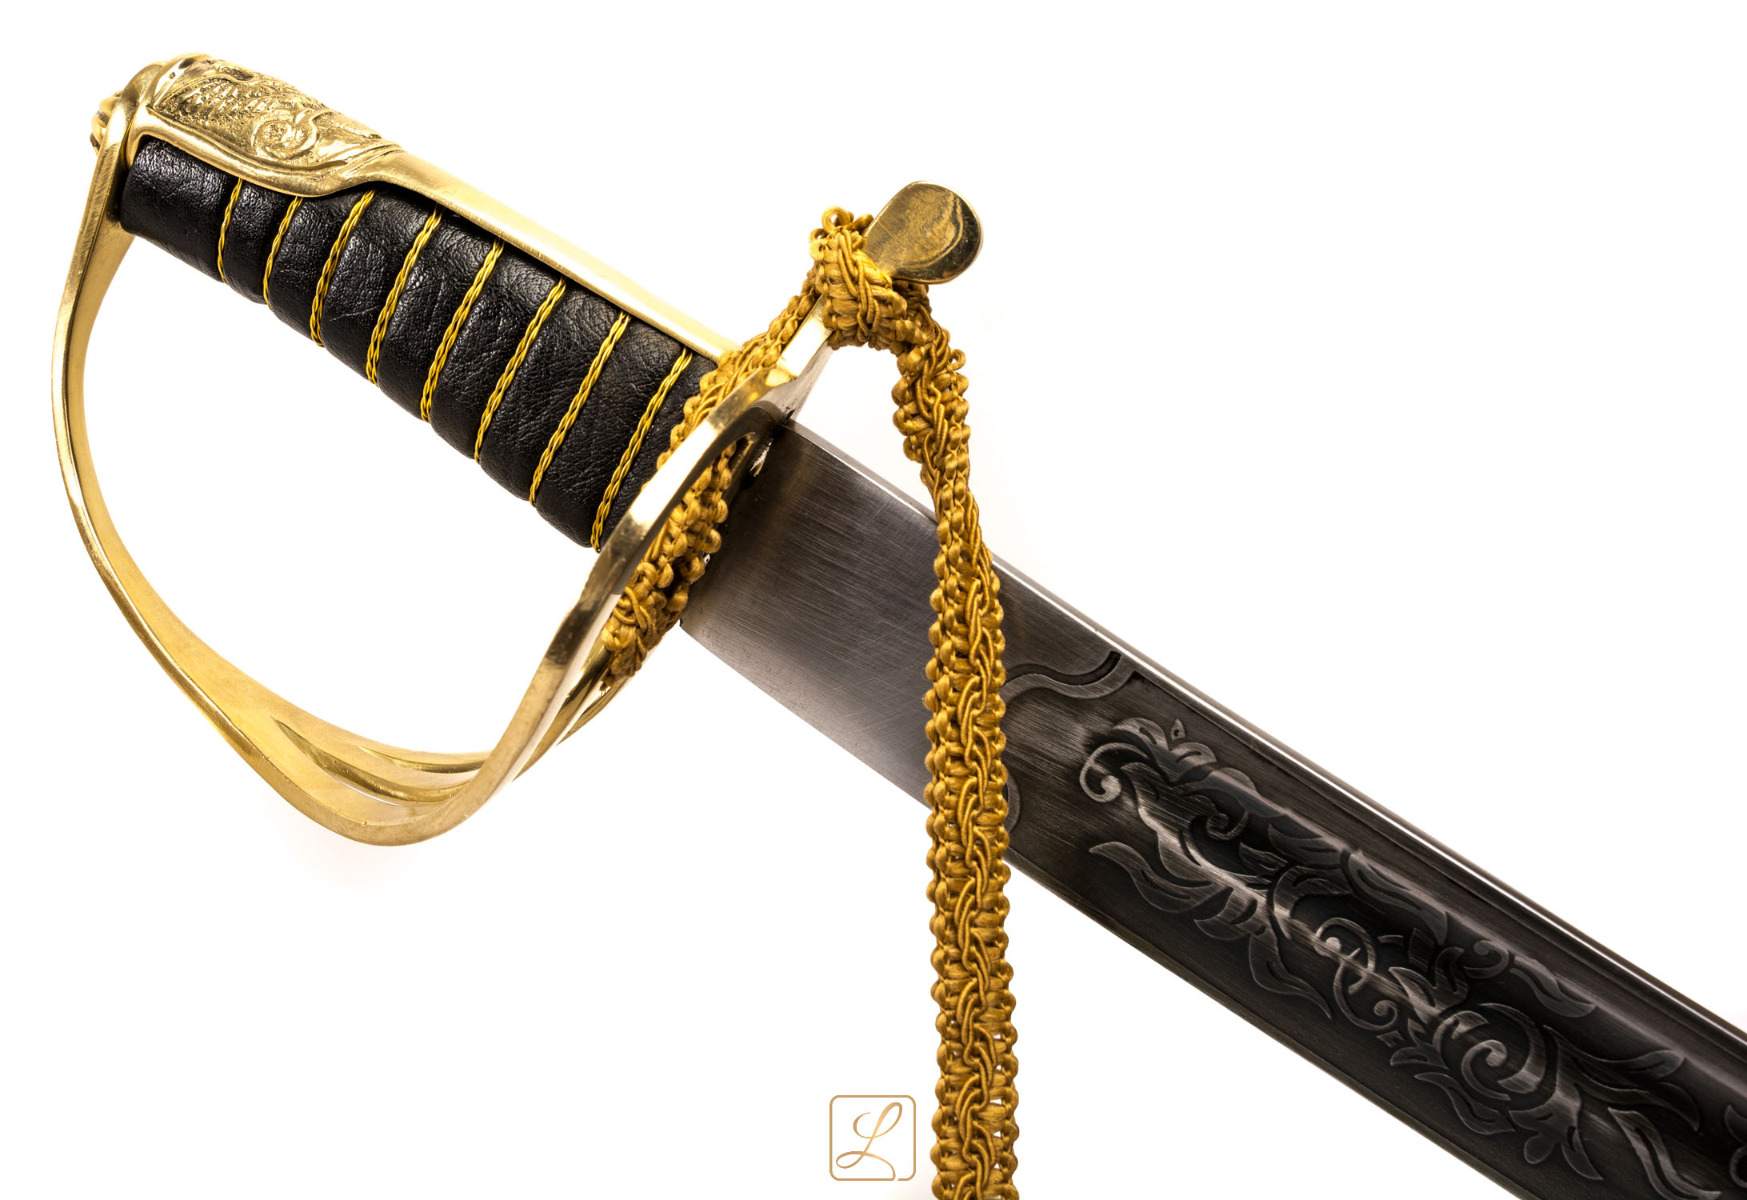 Polish cavalry sabre wz 17 without scabbard, 